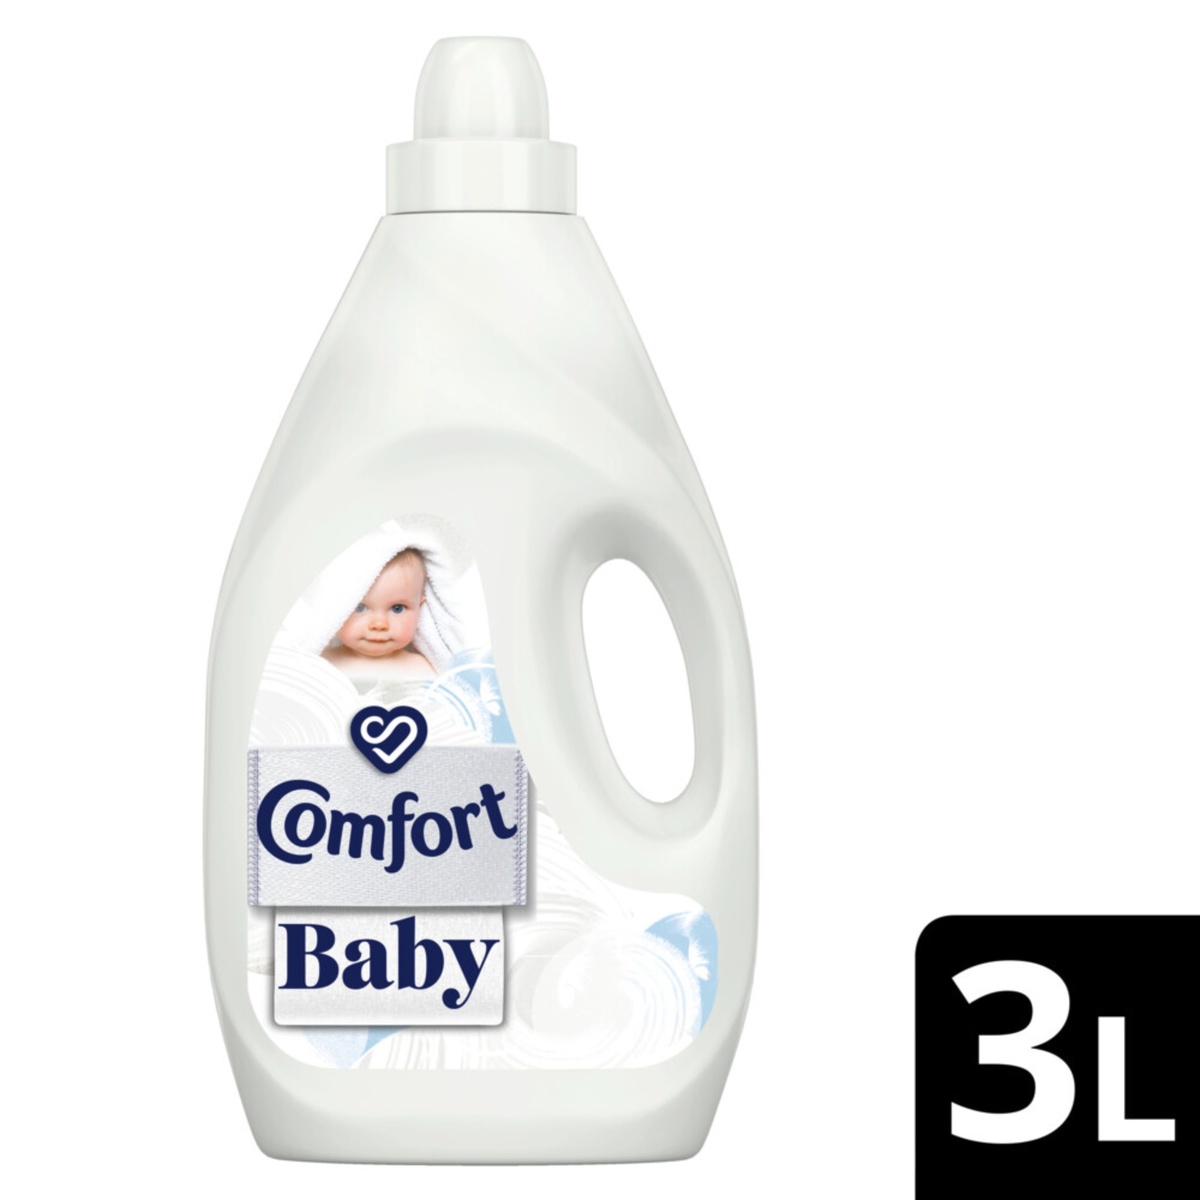 Comfort: Blue Skies Fabric Conditioner (Case of 2 x 3l 85 Washes